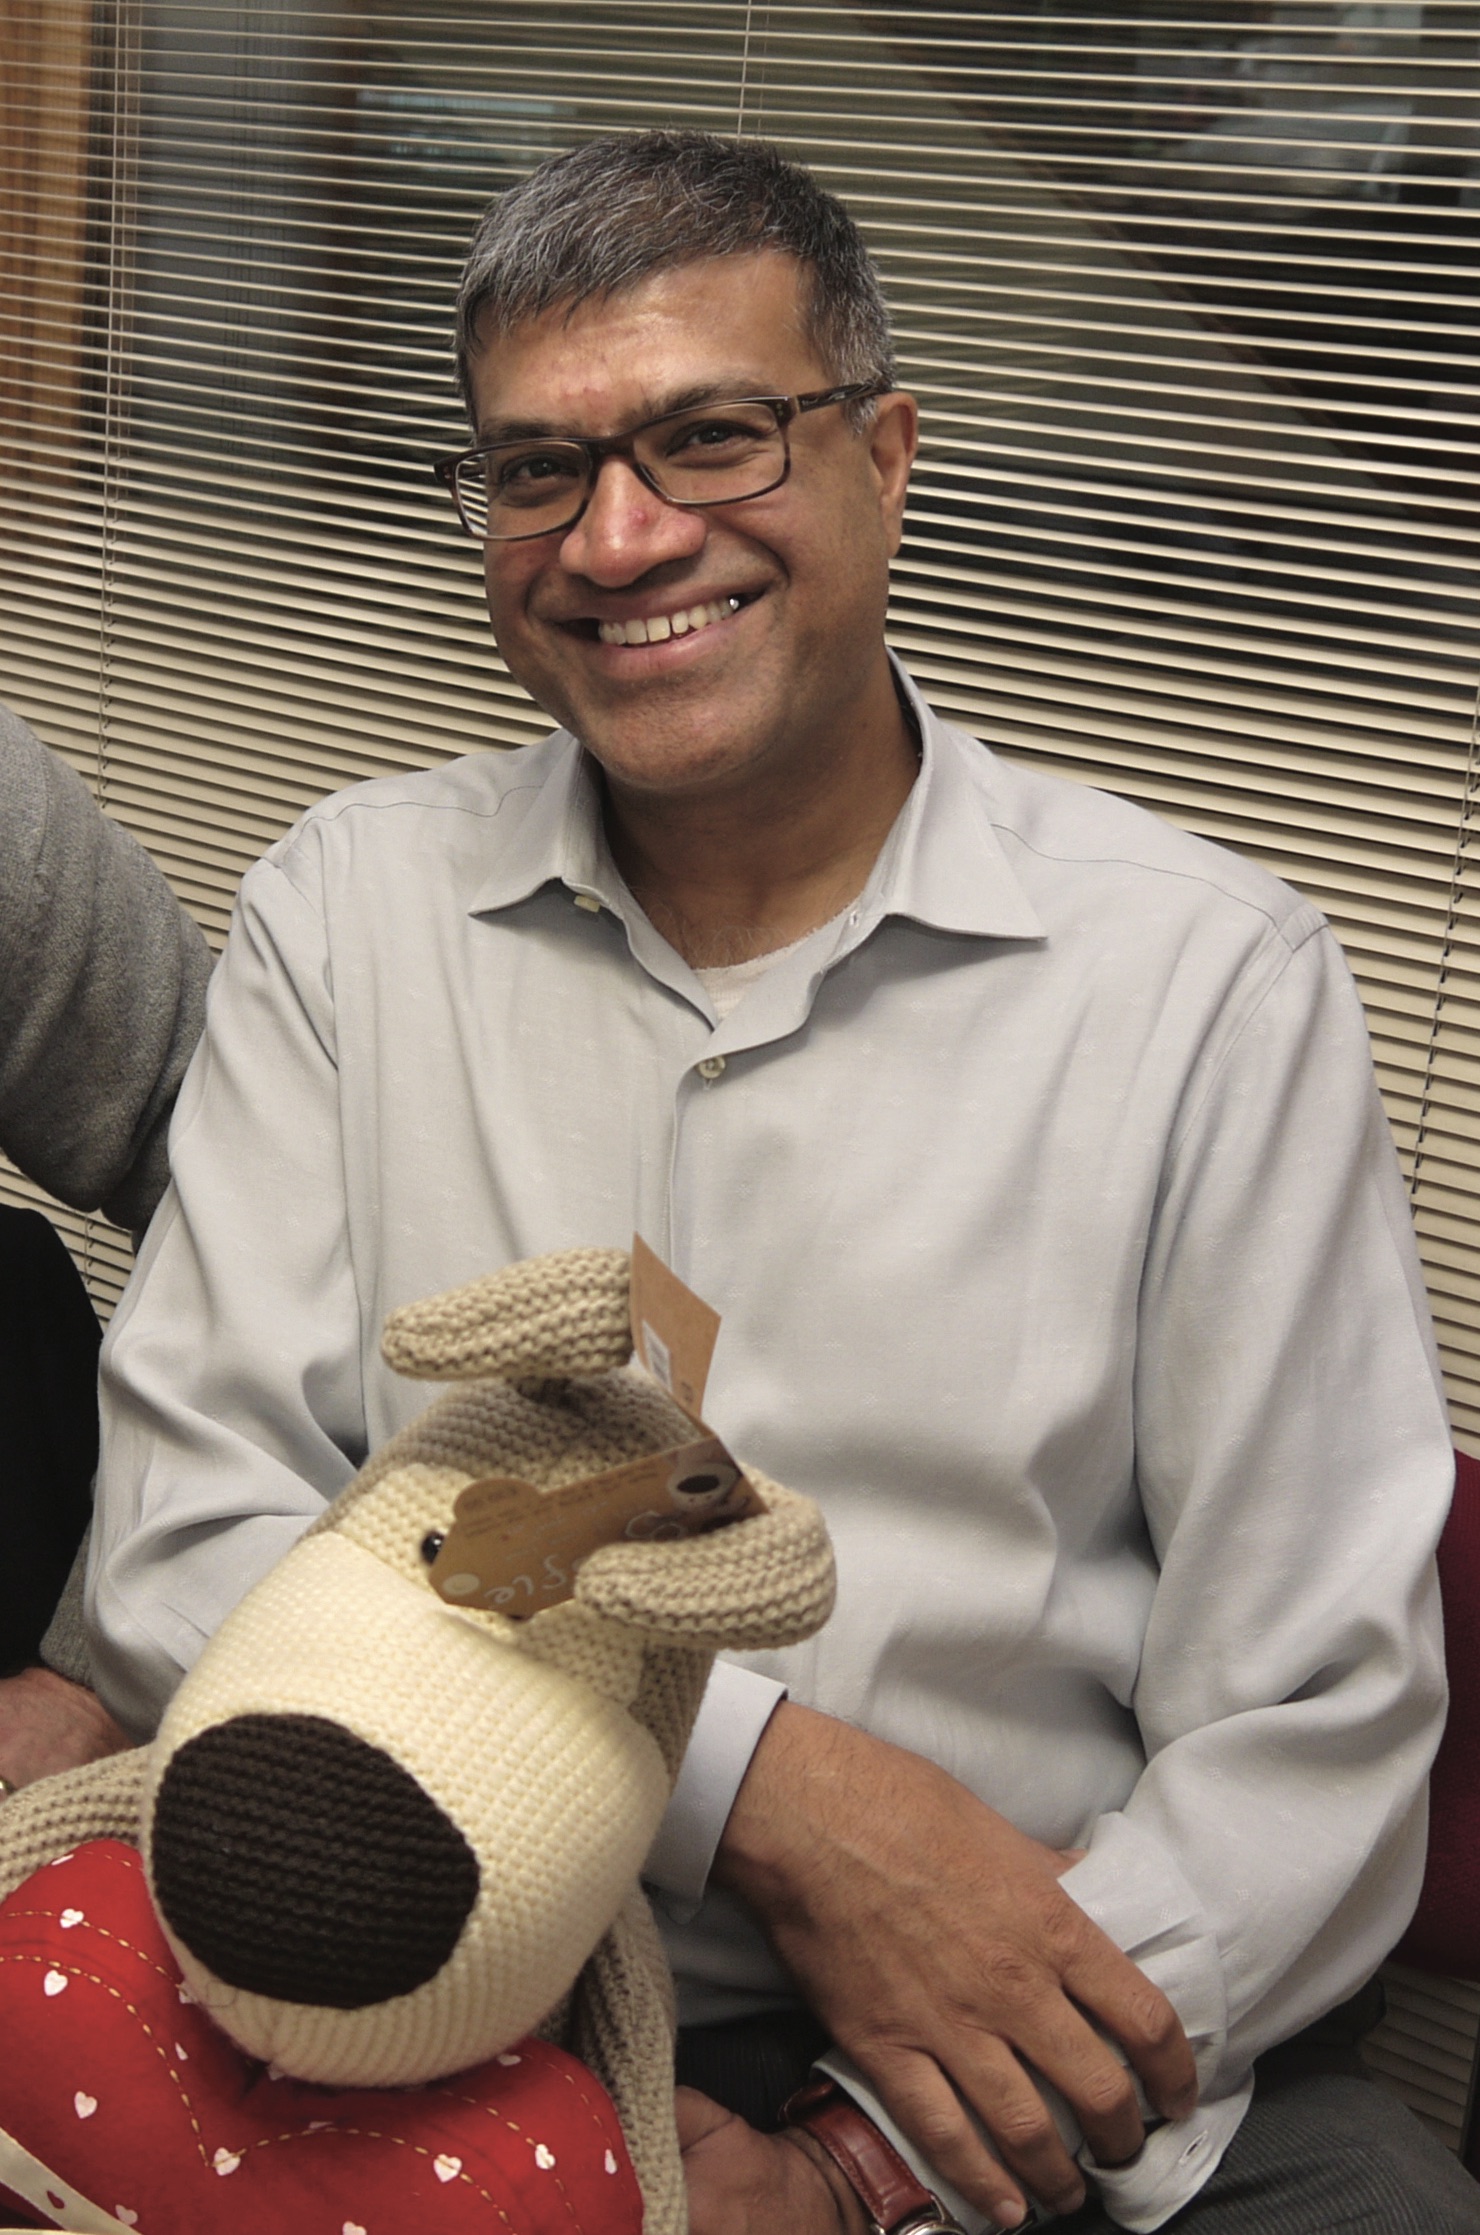 Above: Kishor Shah with a Boofle friend.